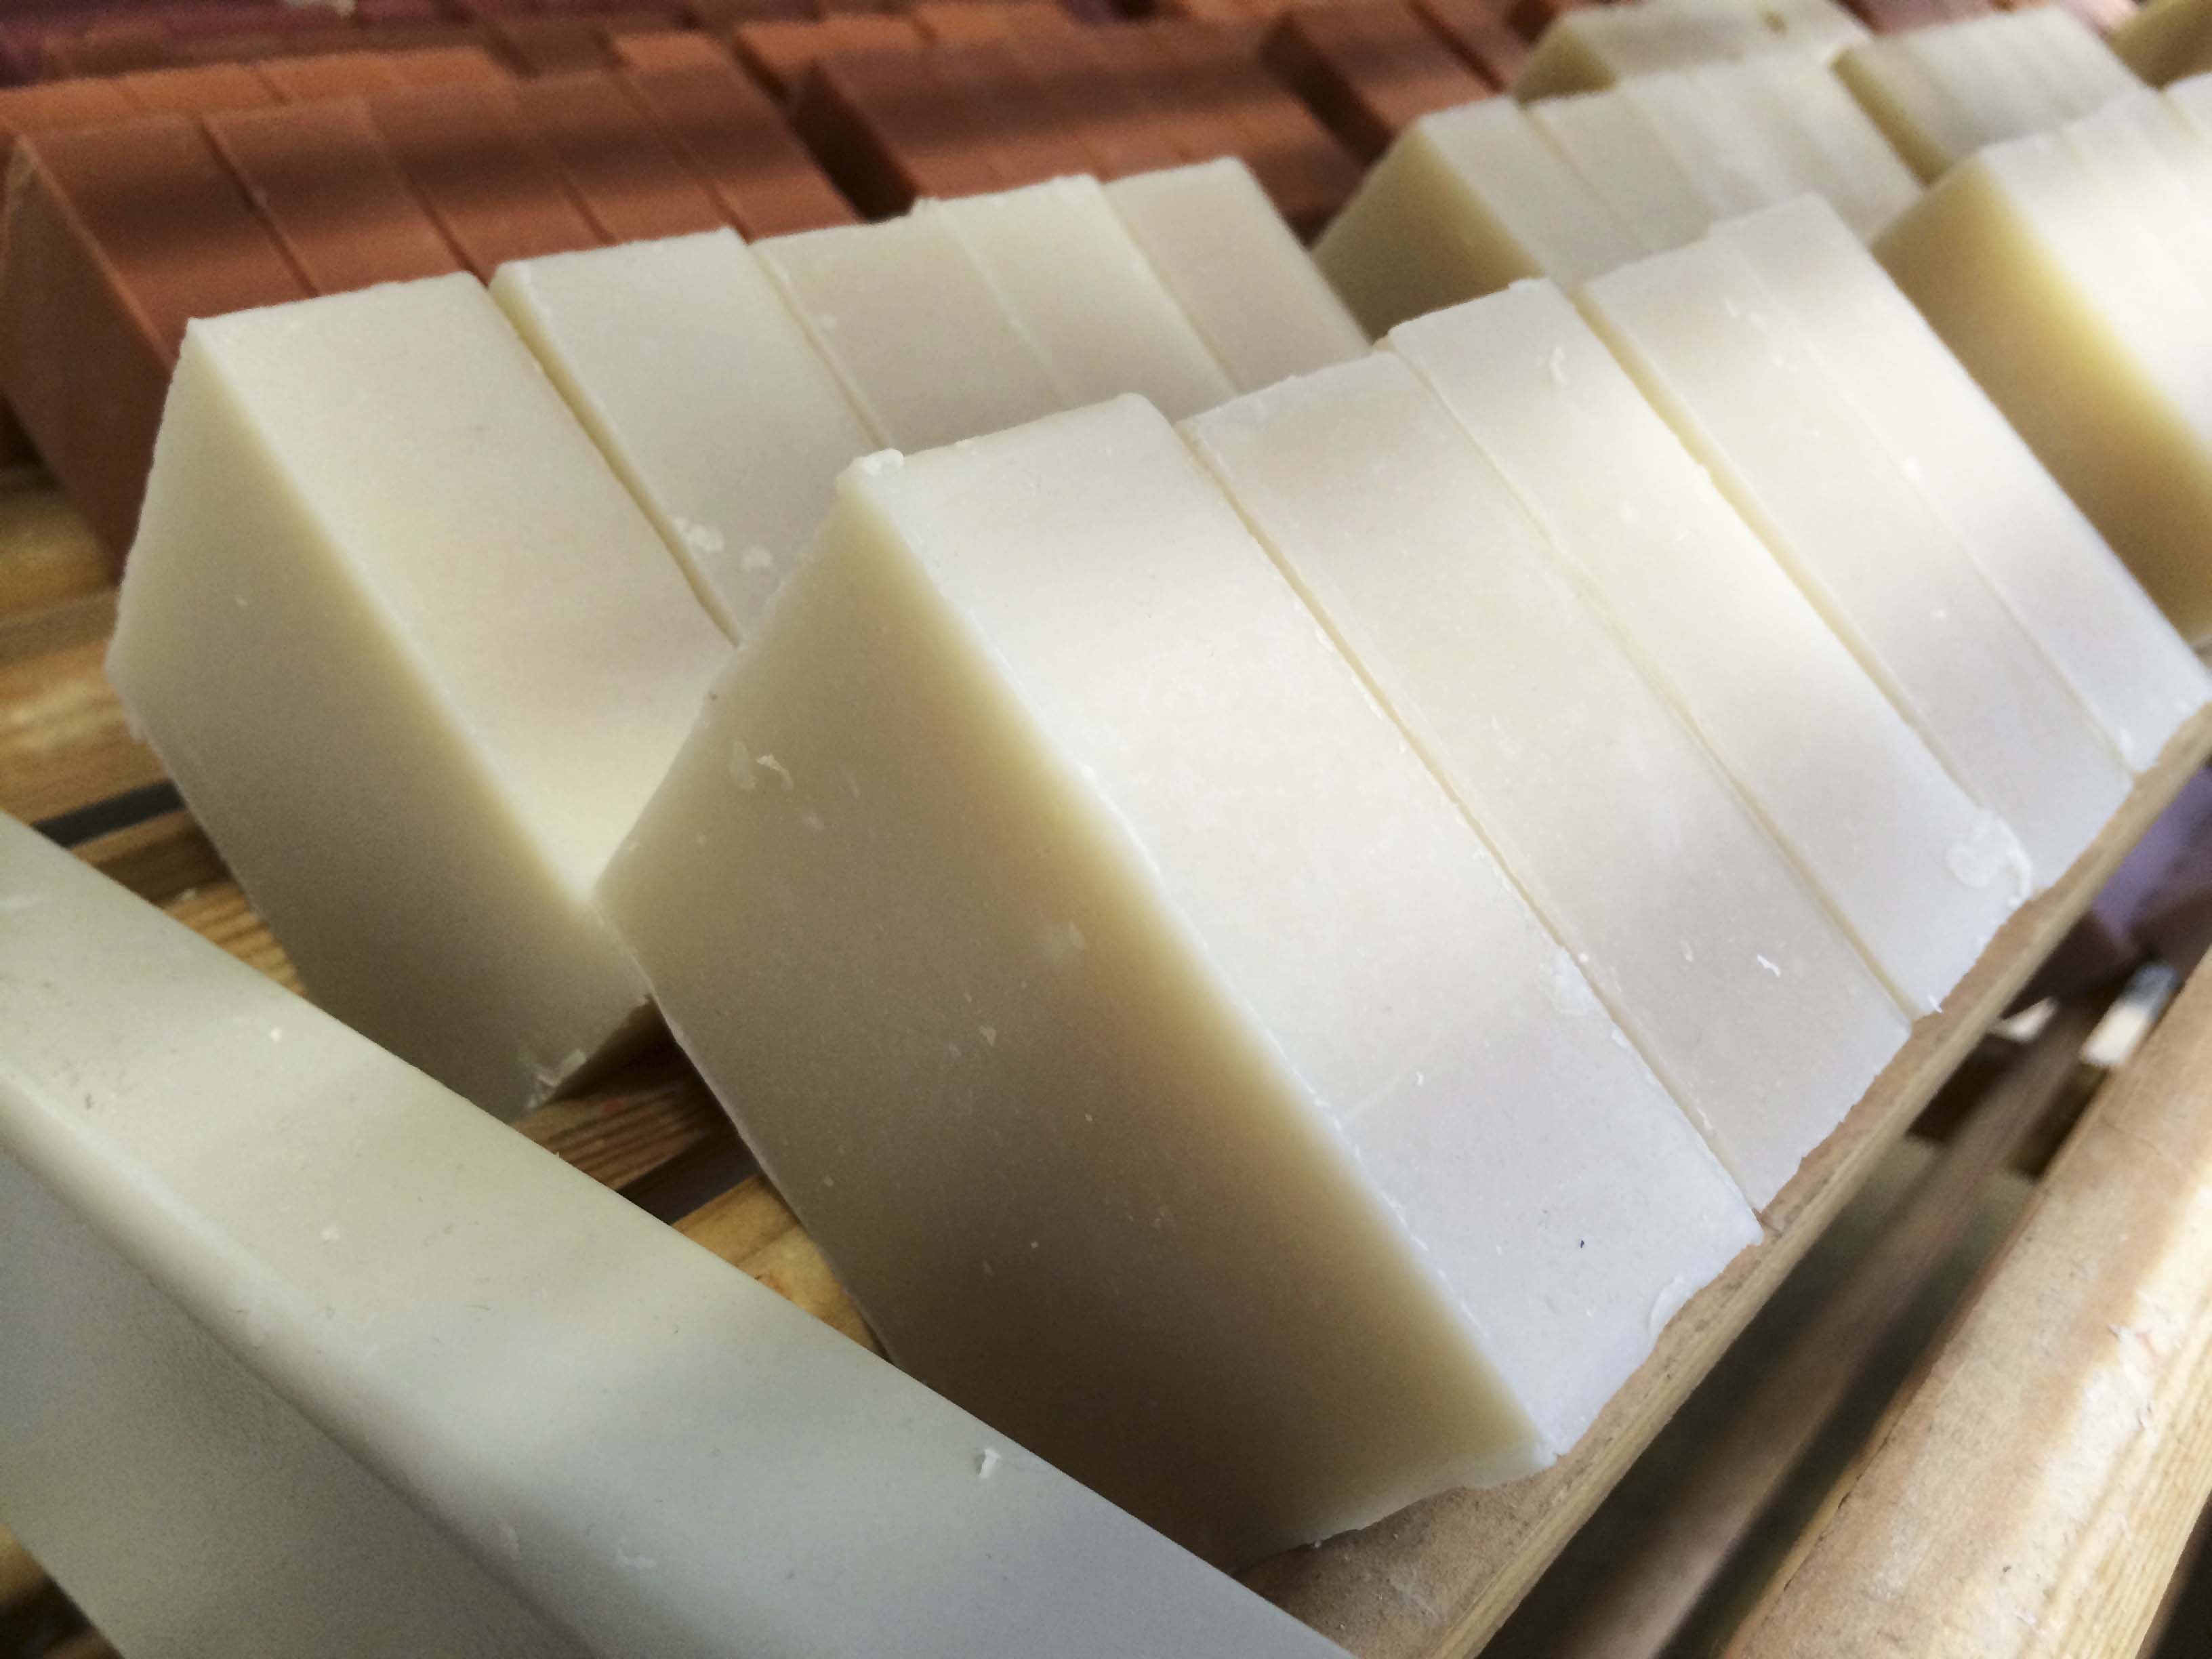 Learn to make cold process soap and blend your own creams